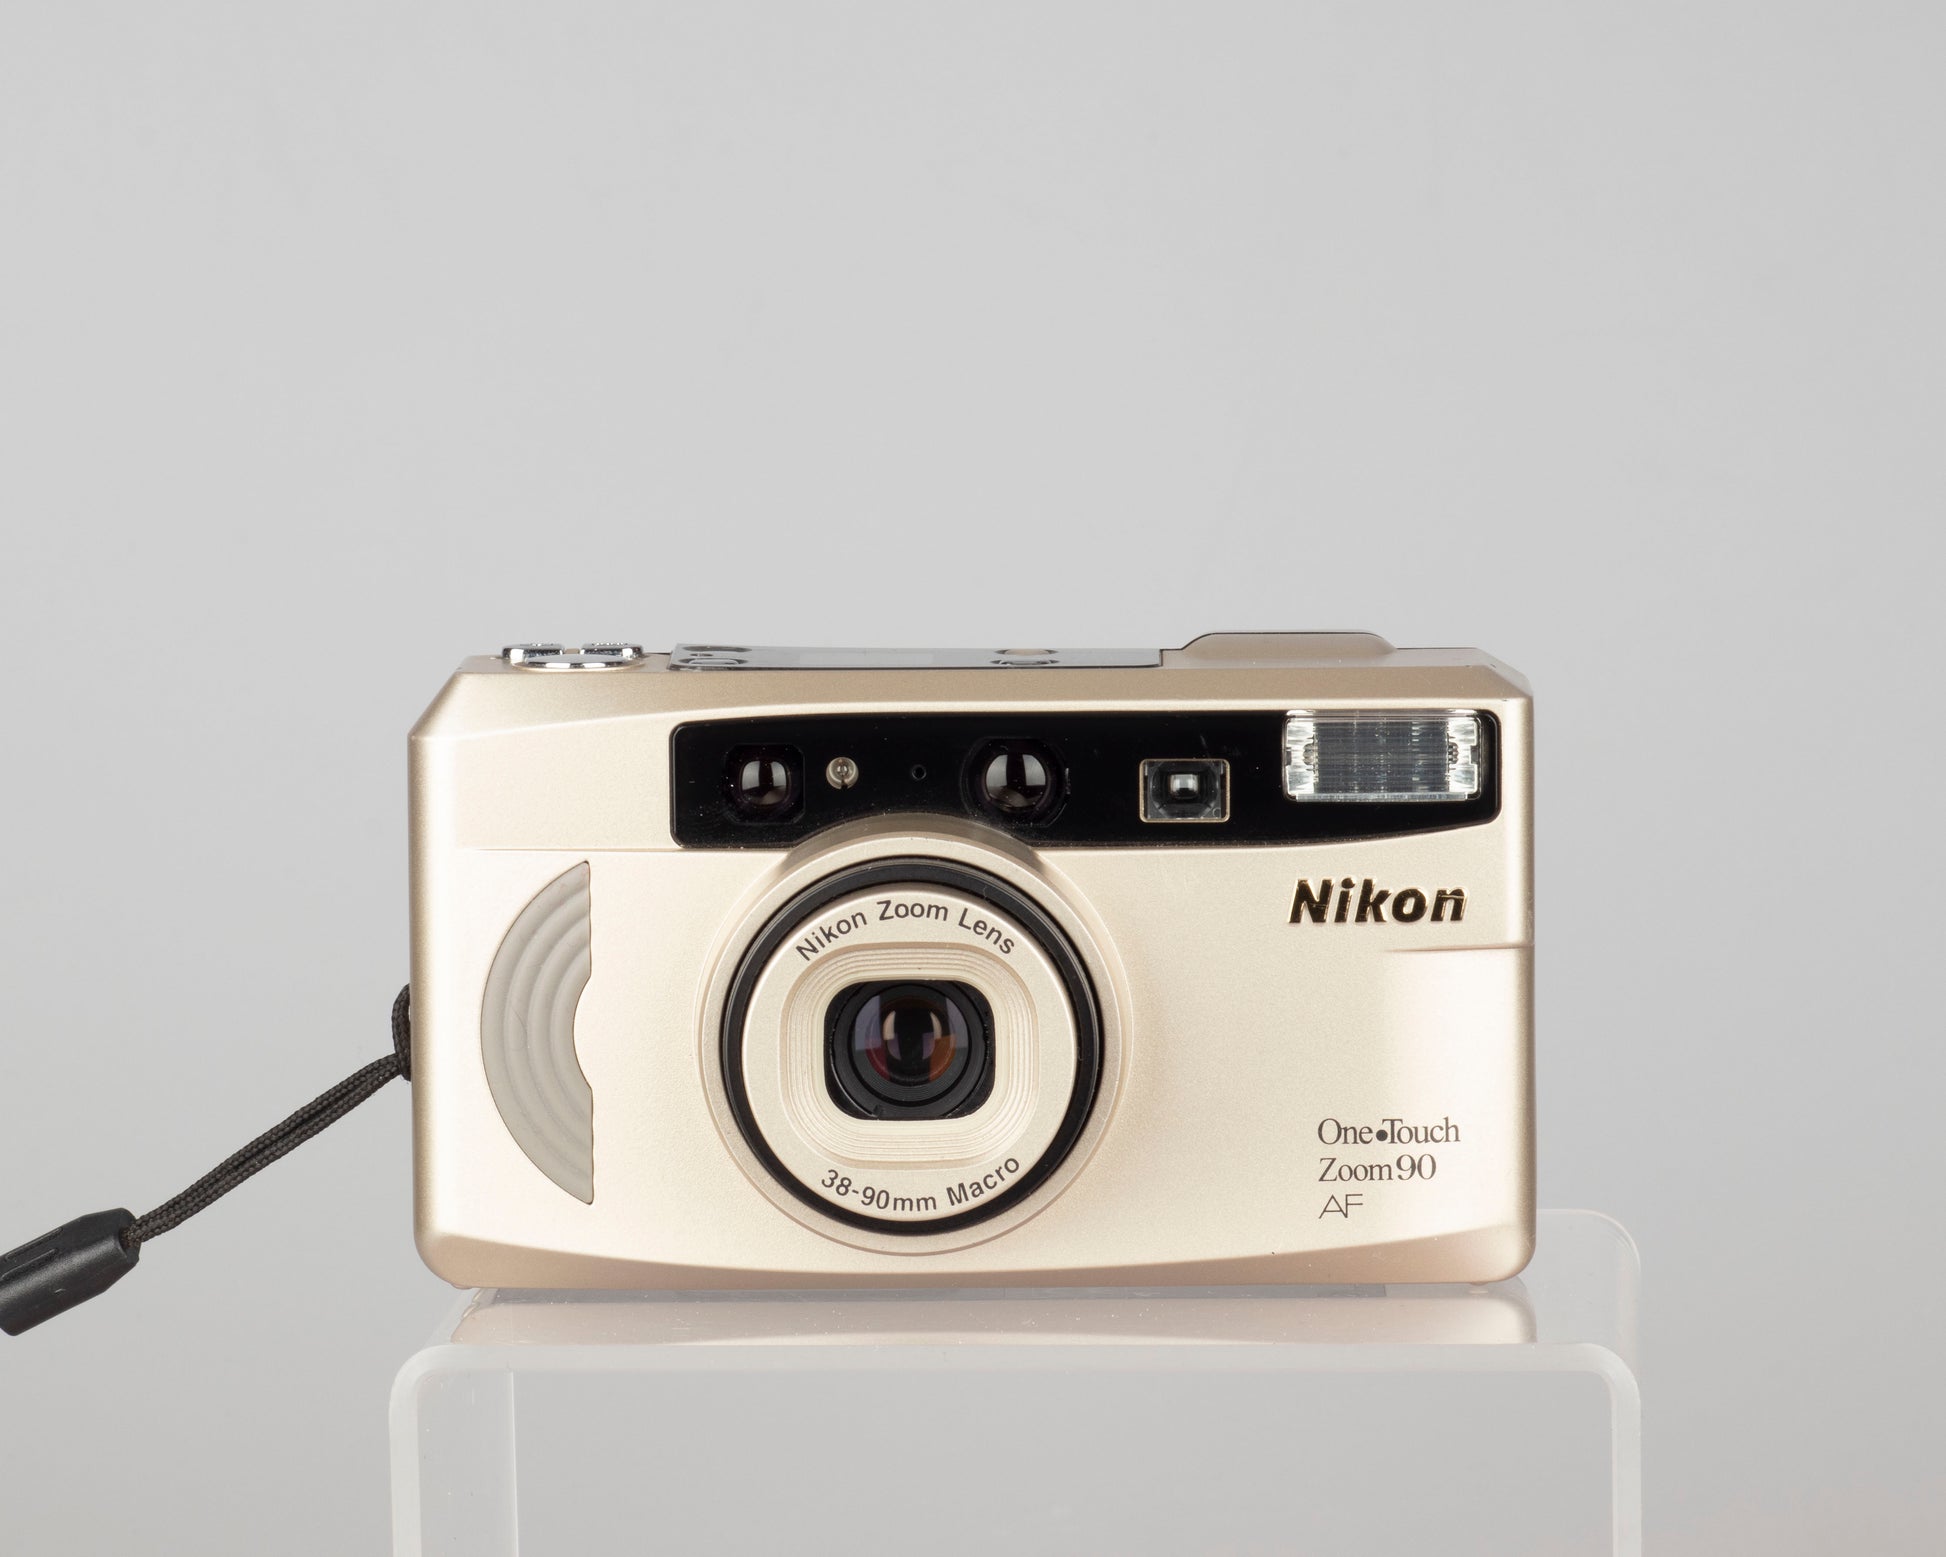 The Nikon One Touch Zoom90 AF is a quality 35mm point-and-shoot from the early aughts.